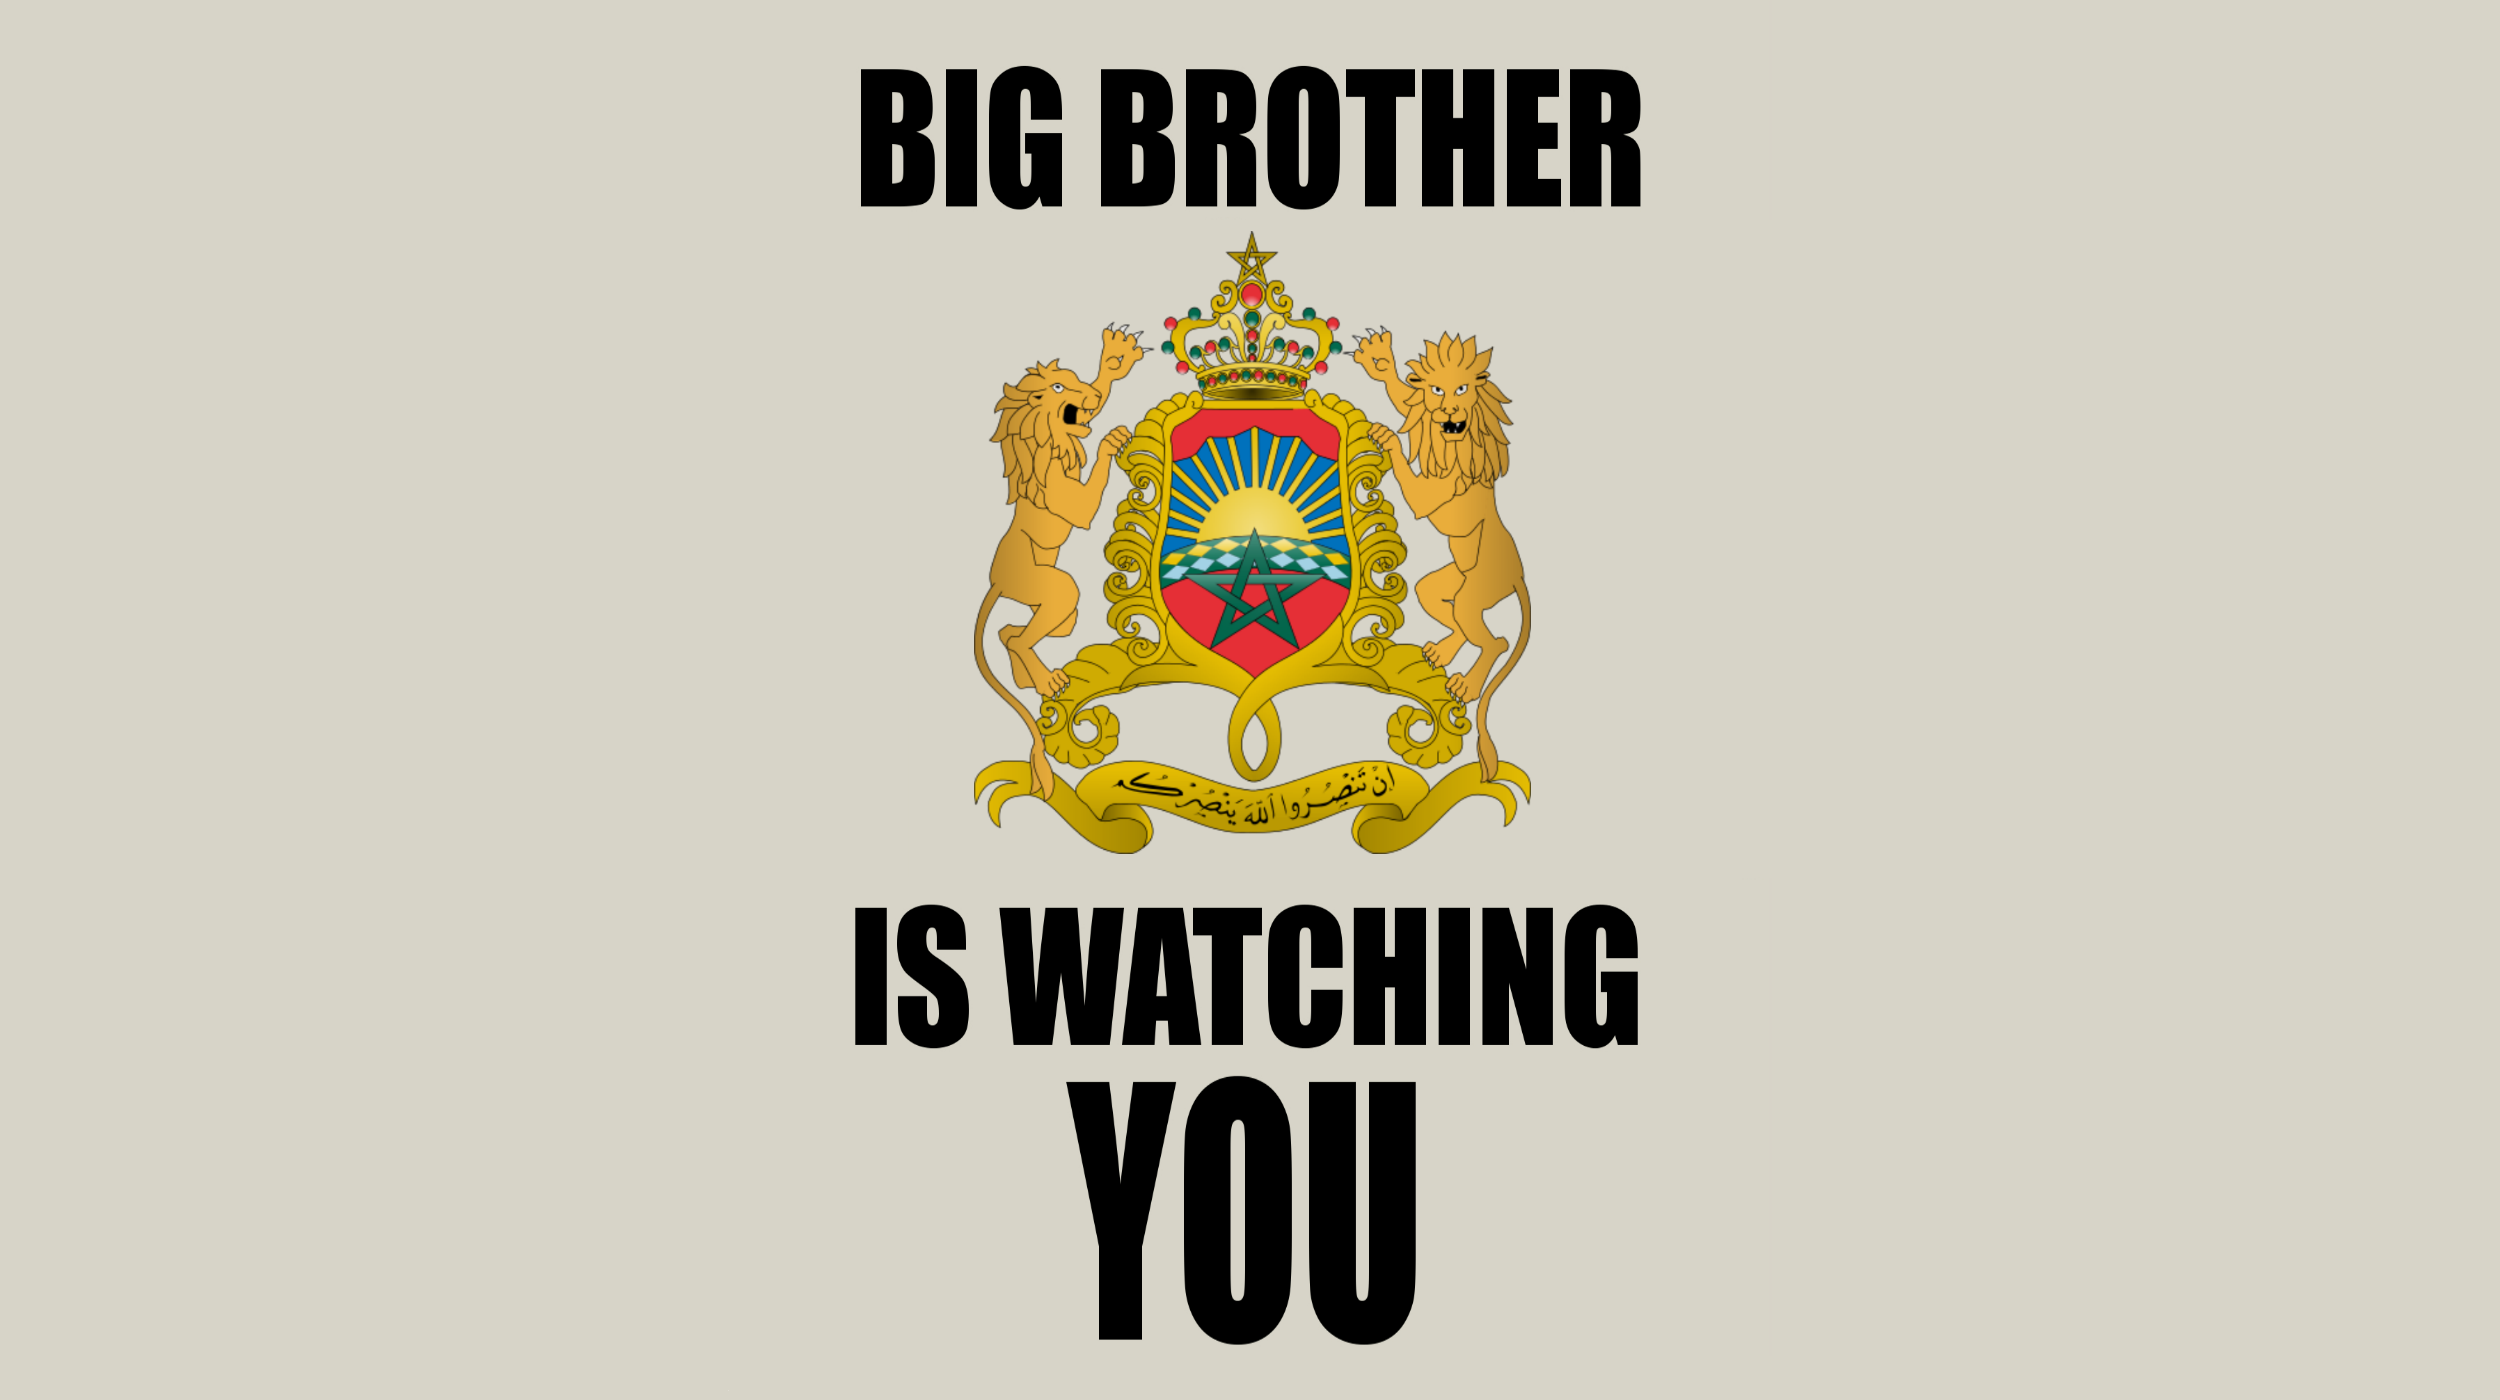 The Moroccan Big Brother is watching you